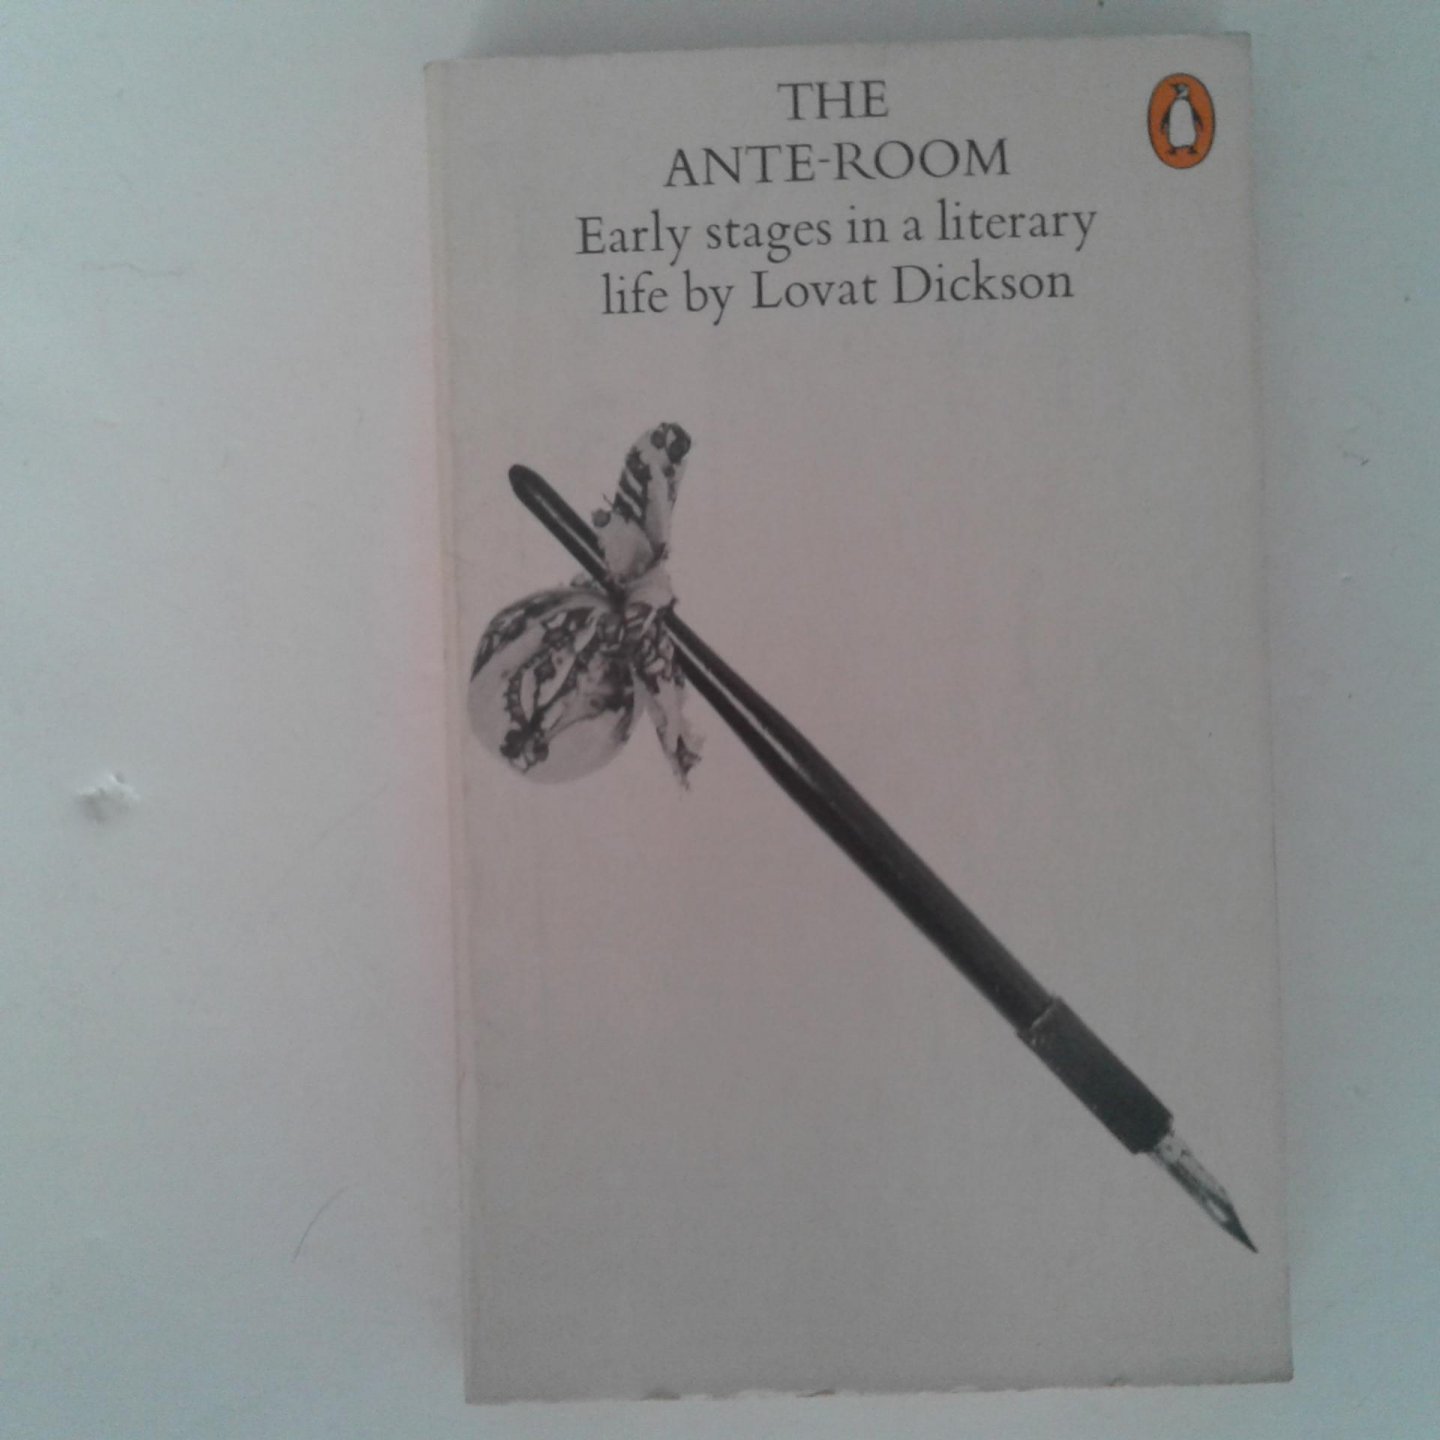 Dickson, Lovat - The Ante-Room ; Early stages in a literary life